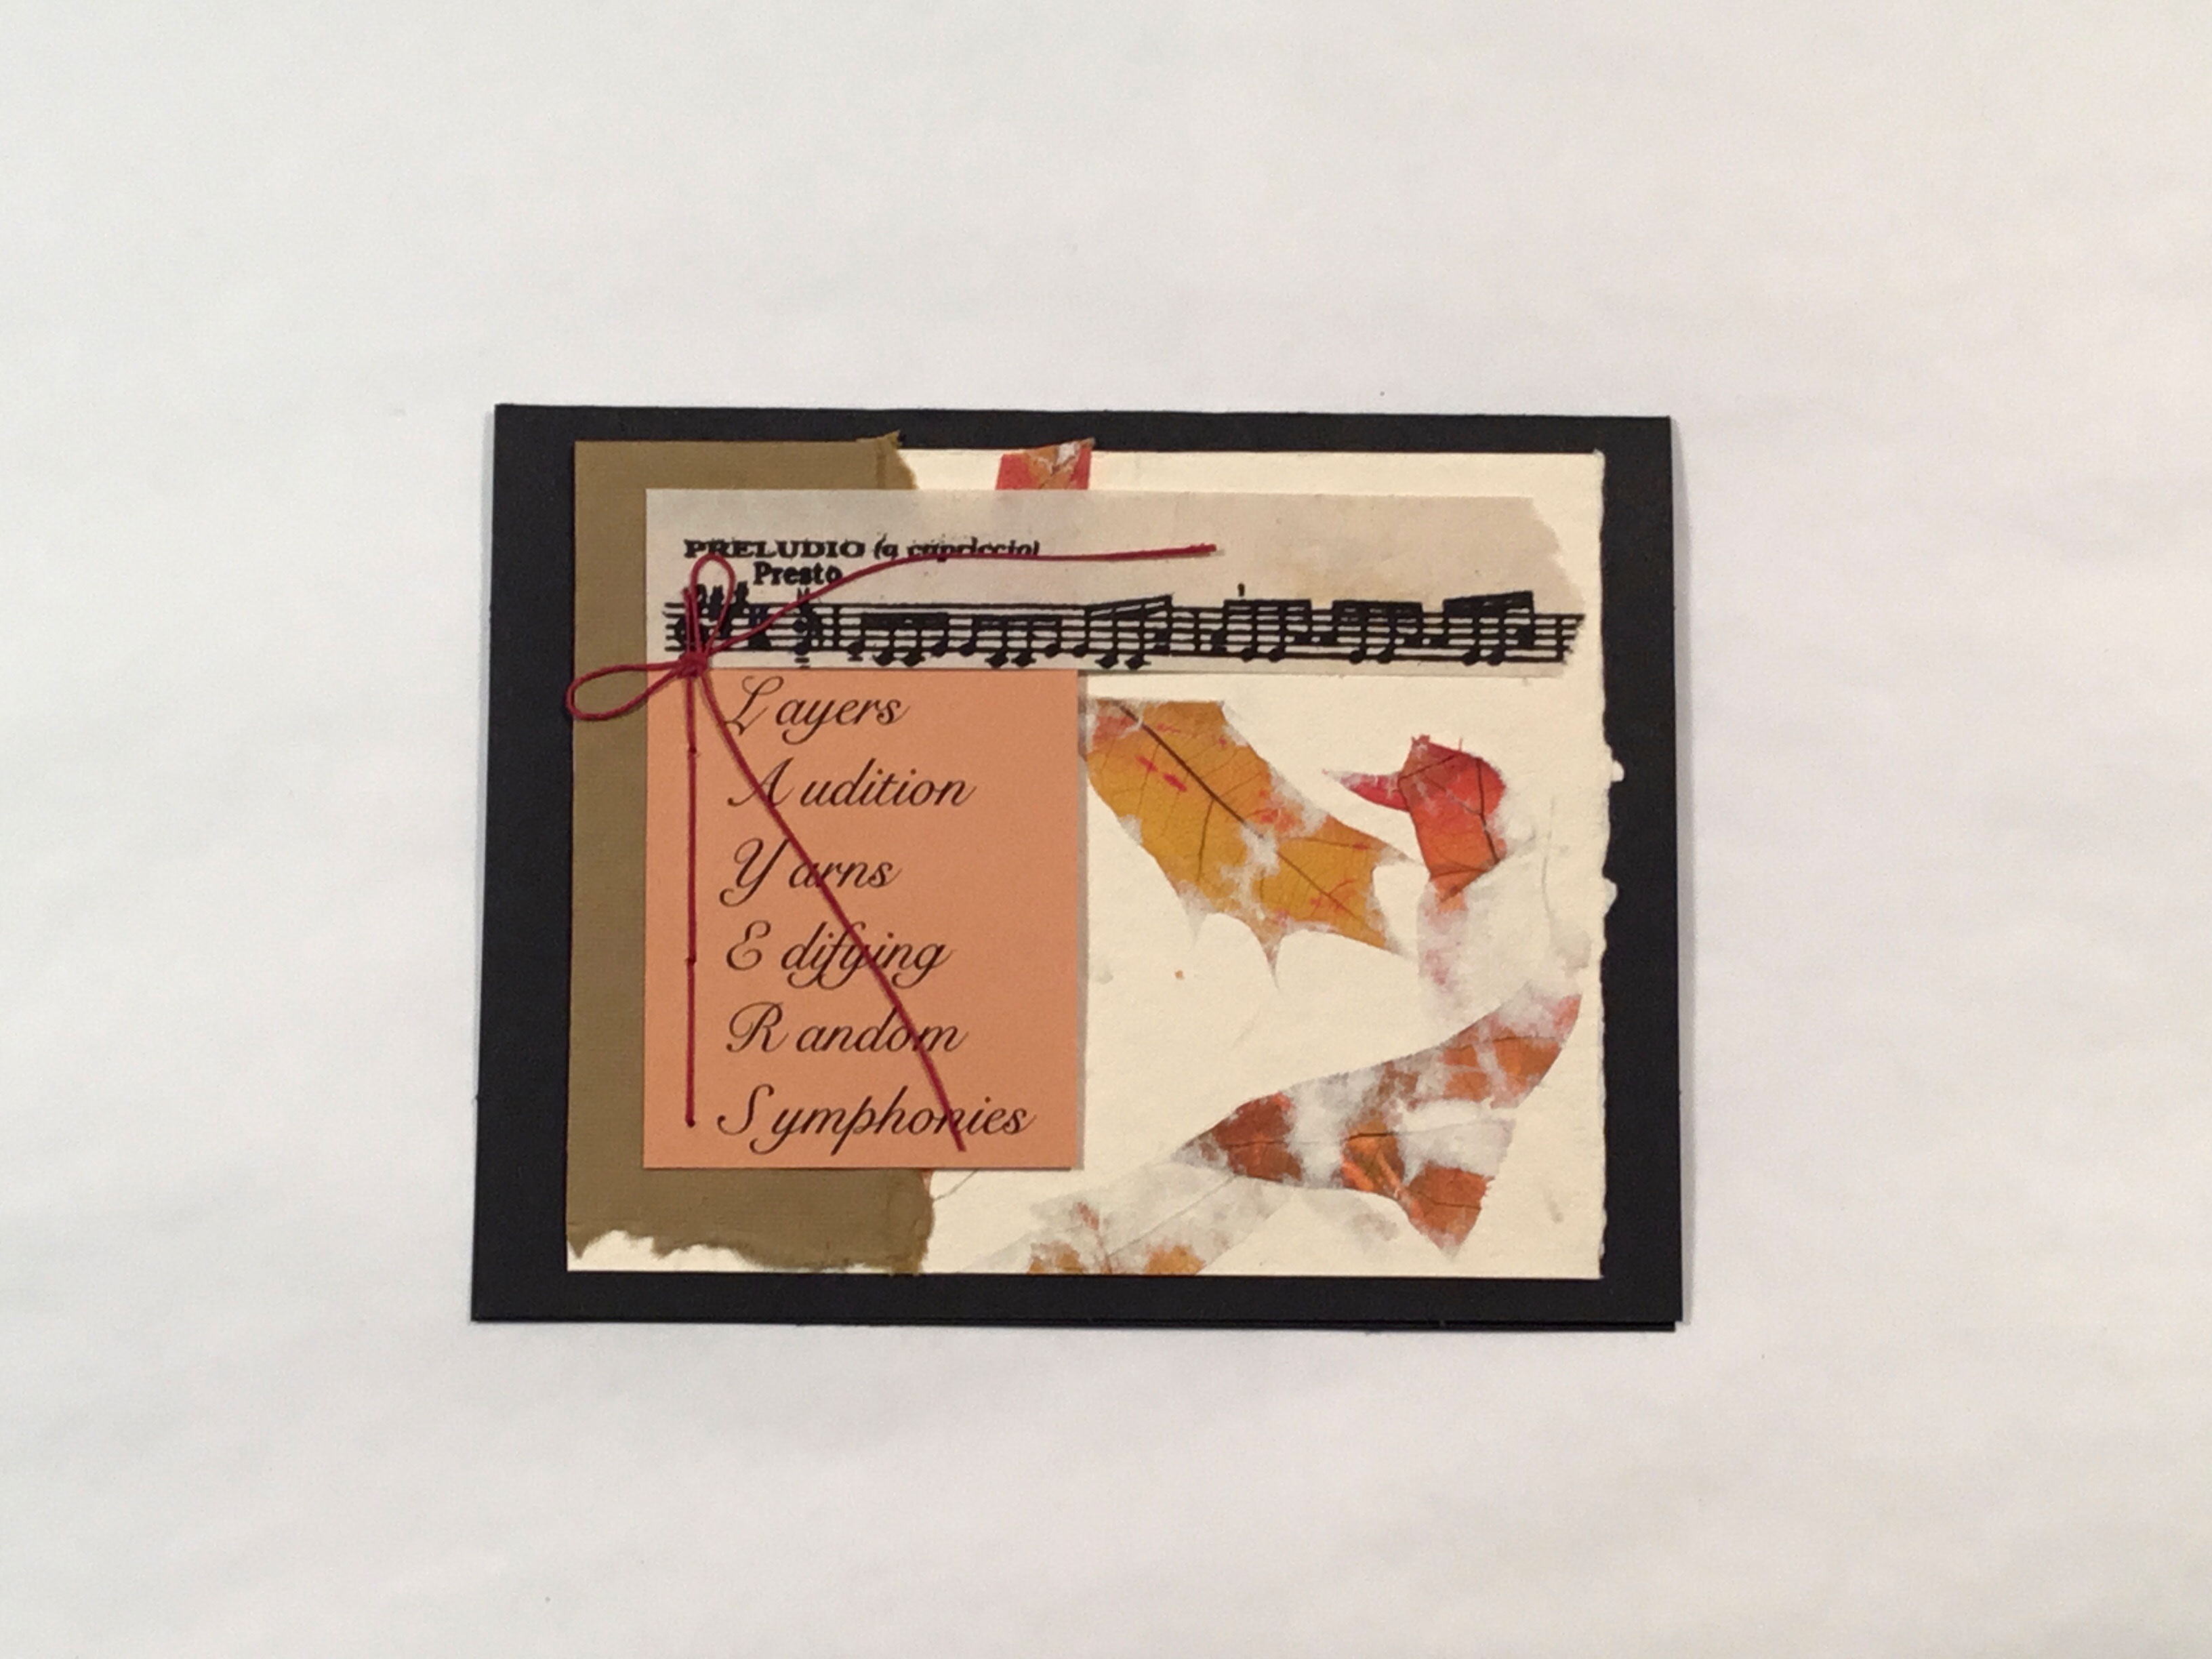 A collaged image of a bar of sheet music, leaves on crème paper, brown torn paper on the lefthand side, and a pale orange square of paper with an acrostic poem that says “Layers Audition Yarns Edifying Random Symphonies”, spelling out “Layers”, and a red thread tied in a bow on top.